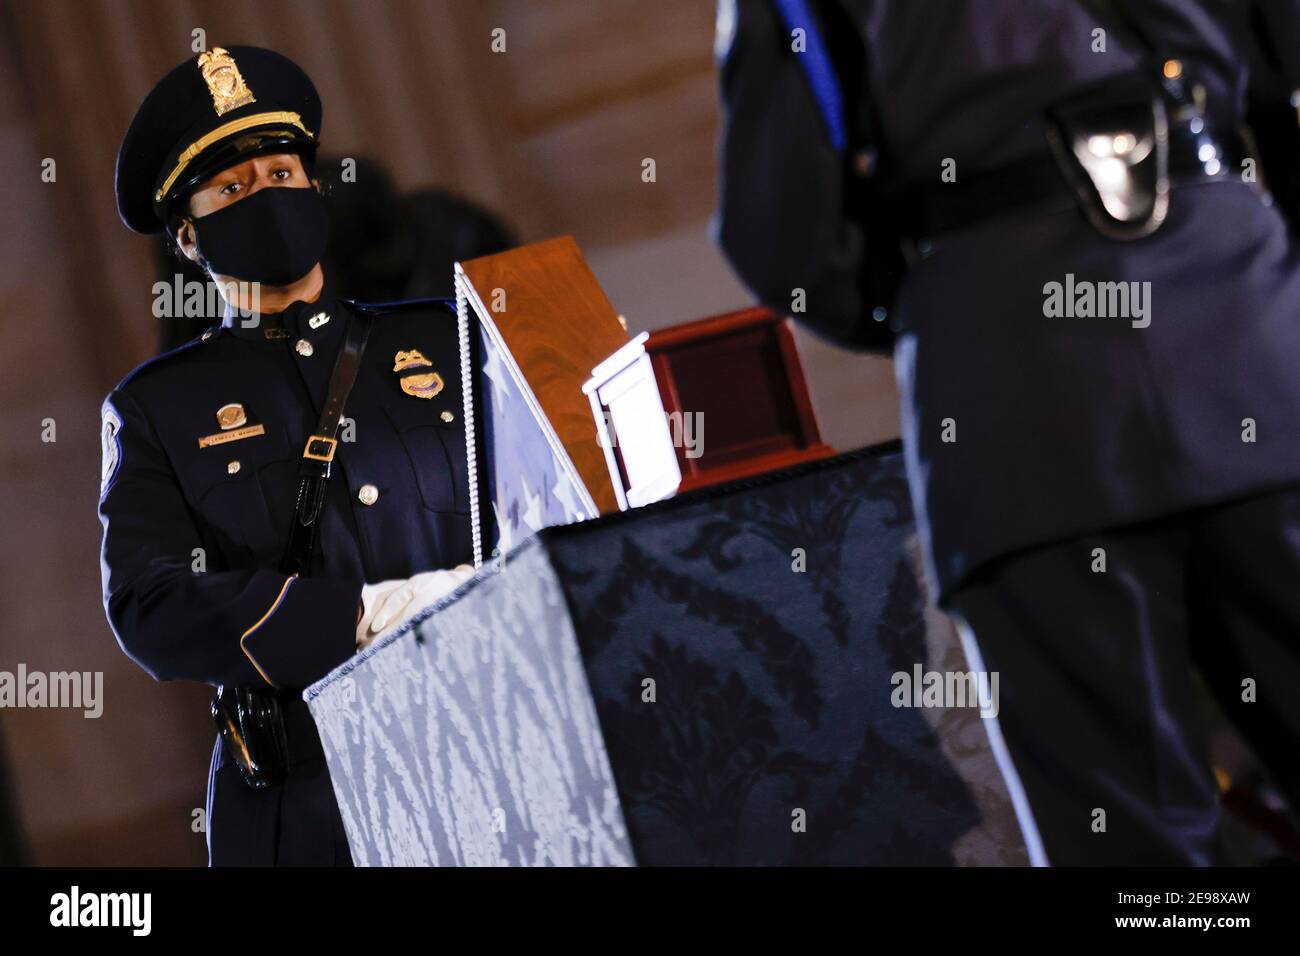 Washigton, USA. 03rd Feb, 2021. U.S. Capitol Police officers stand guard, as the remains of Capitol Police officer Brian Sicknick lay in honor in the Rotunda of the U.S. Capitol building after he died on Jan. 7 from injuries he sustained while protecting the U.S. Capitol during the Jan. 6 attack on the building, in Washington, DC, U.S. February 3, 2021. (Photo by Carlos Barria/Pool/Sipa USA) Credit: Sipa USA/Alamy Live News Stock Photo